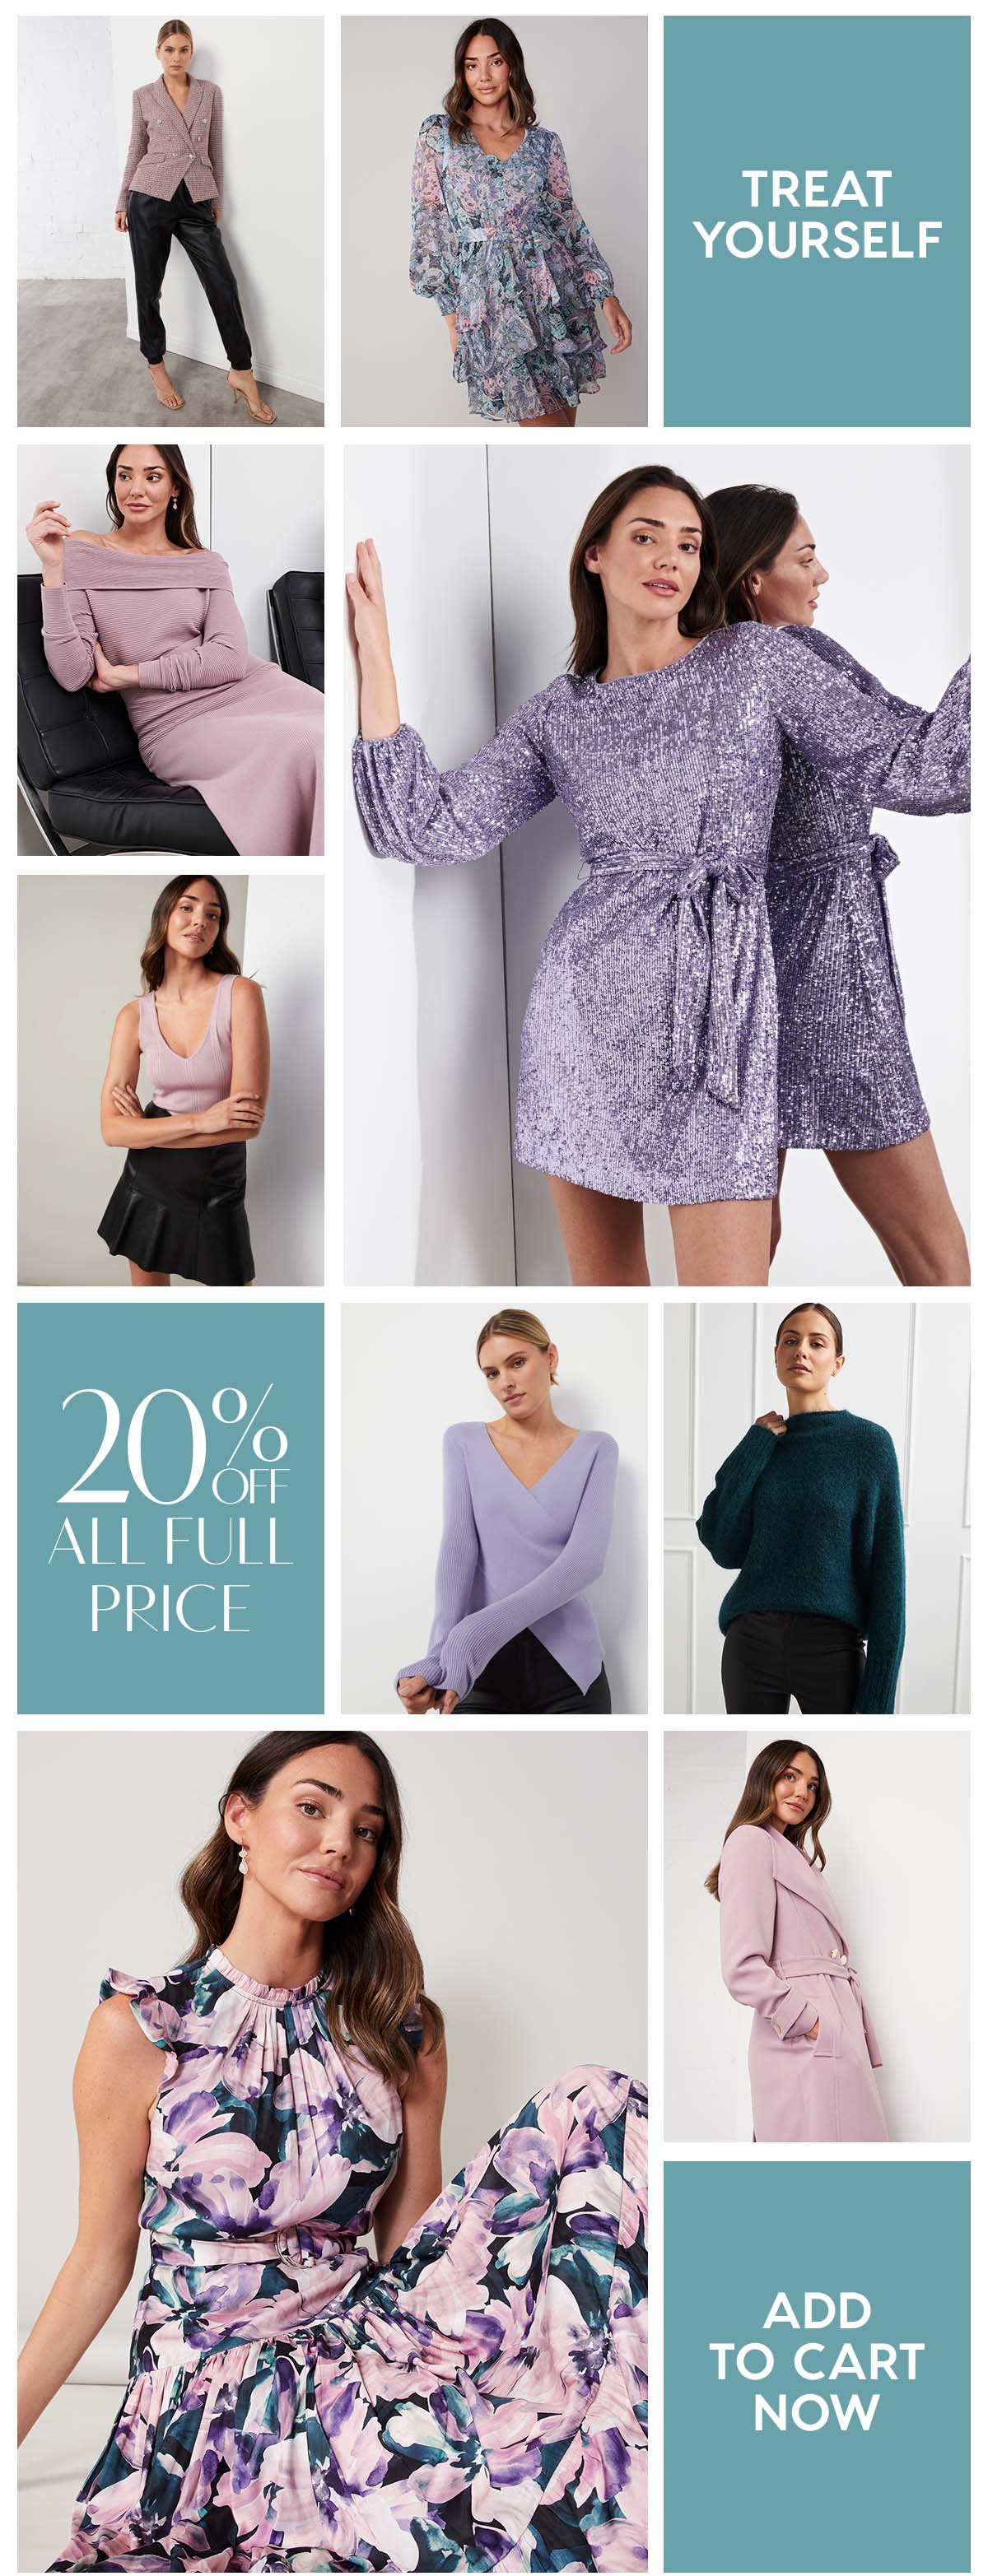 Treat Yourself. 20% Off All Full Price. Add To Cart Now.